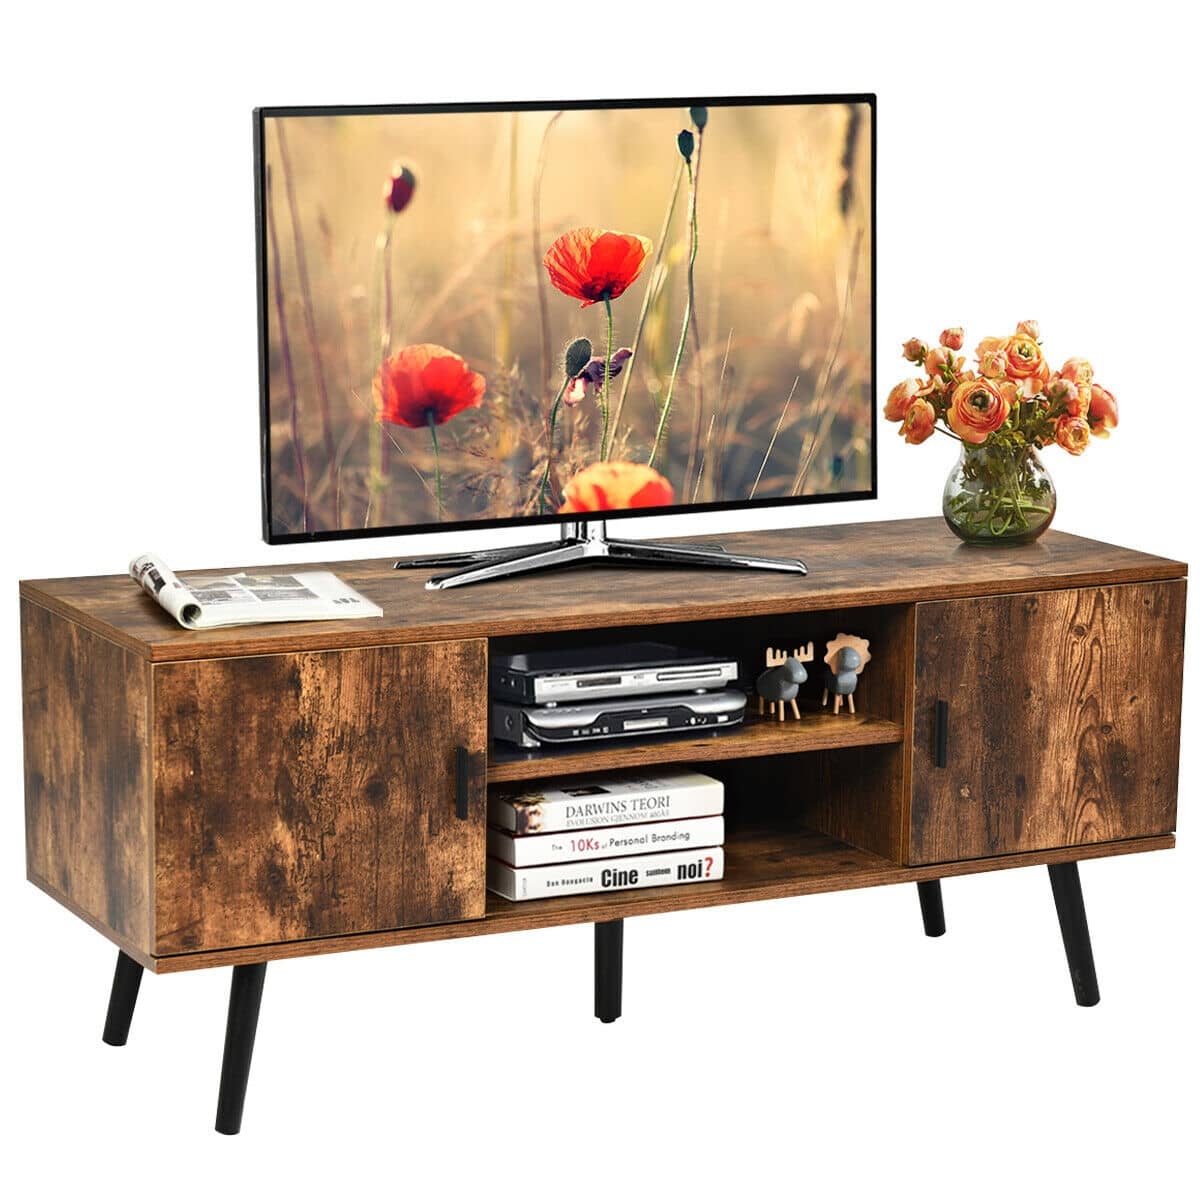 CASAINC Industrial TV Stand with Storage Cabinets-Casainc Canada